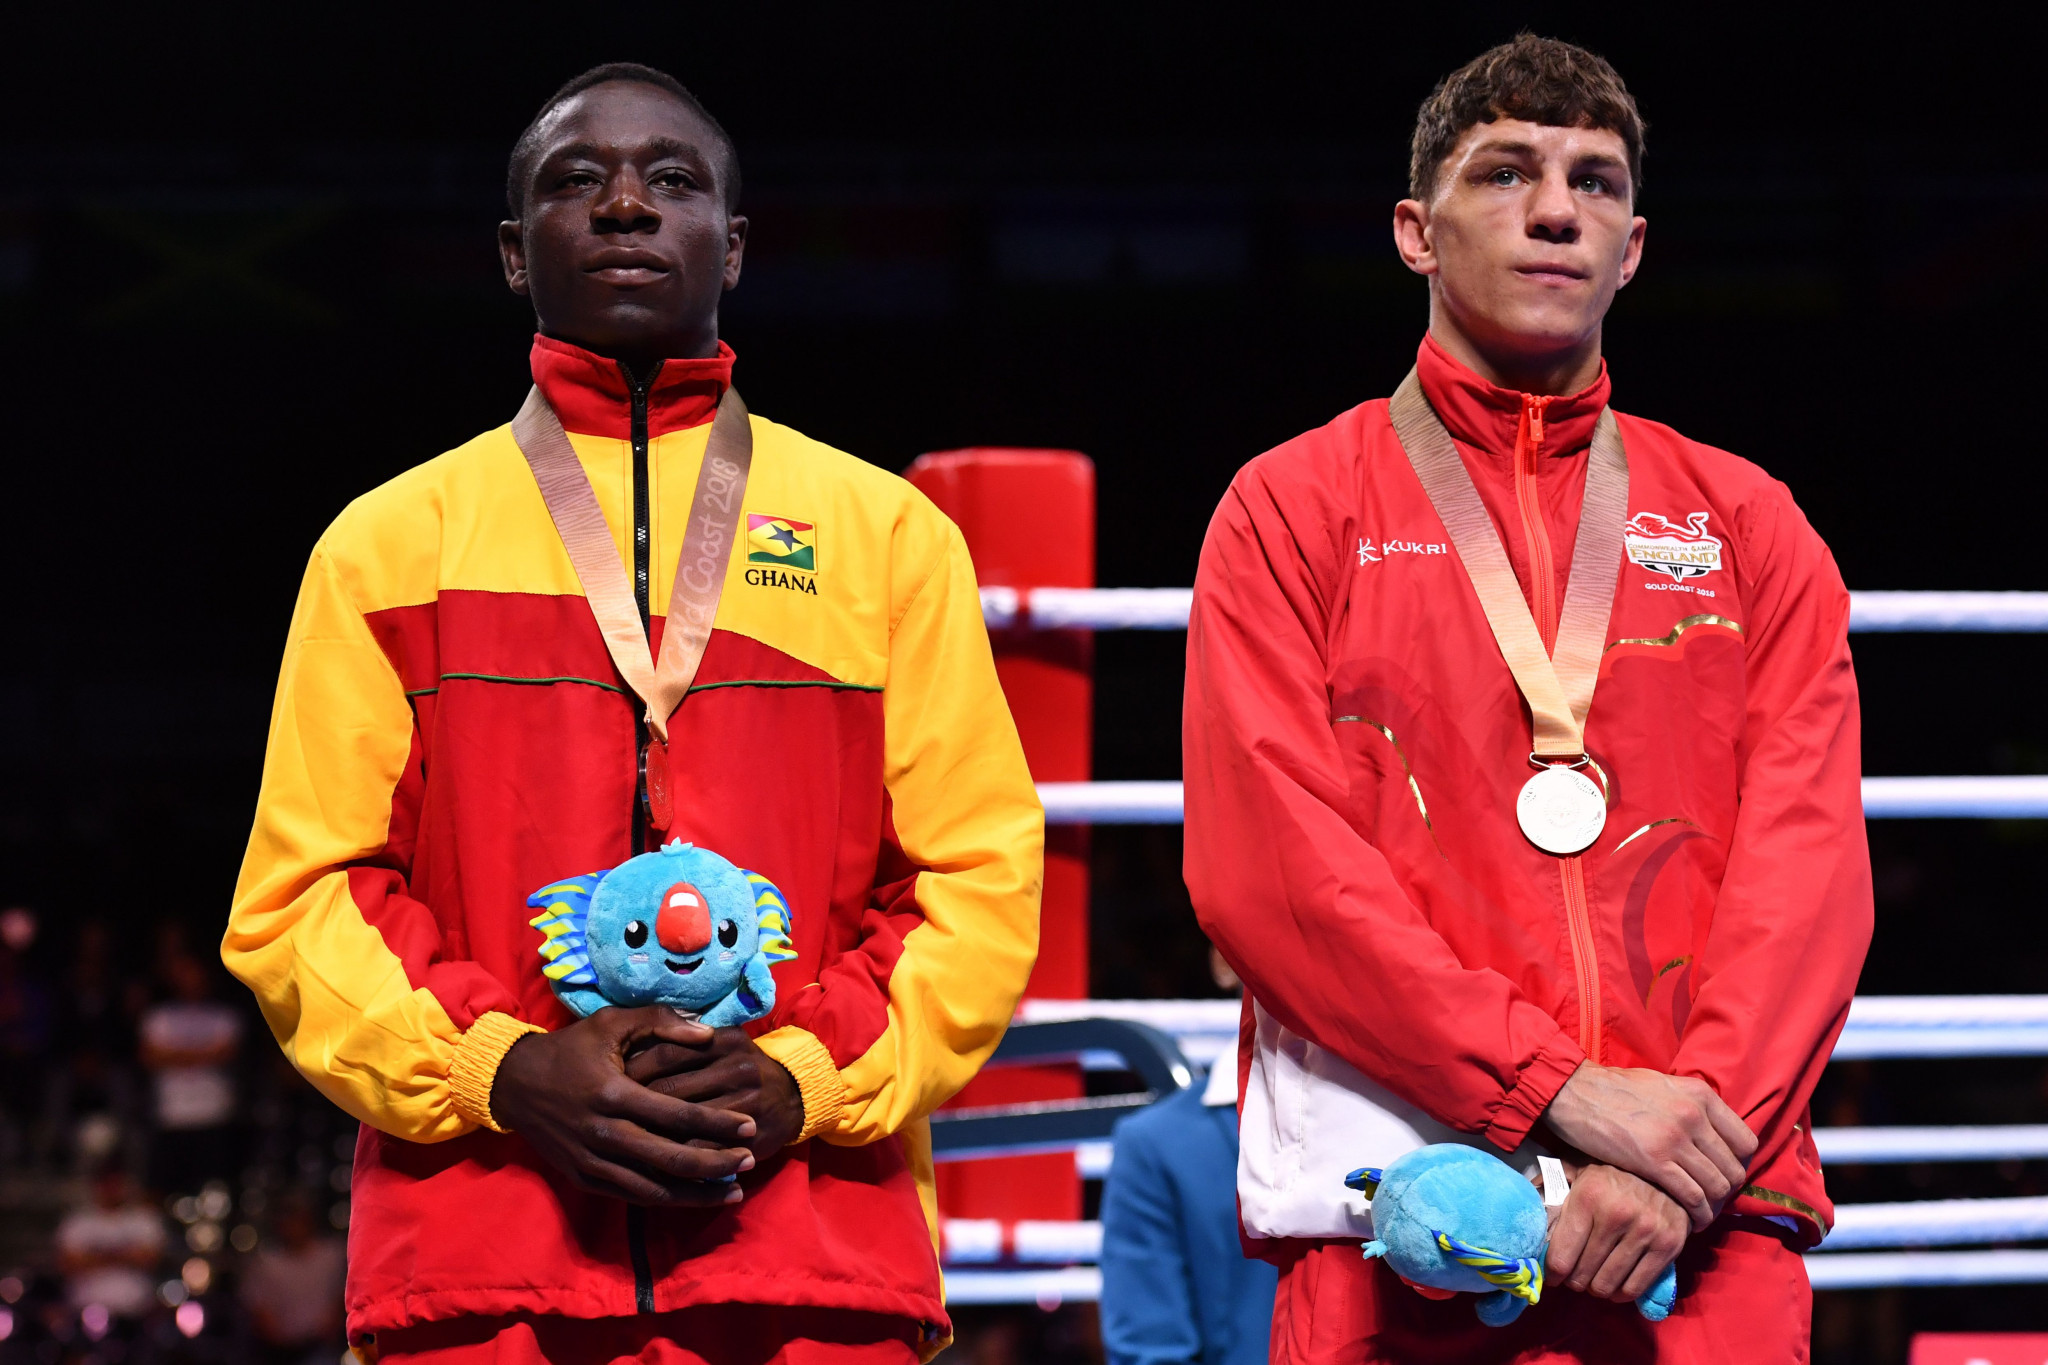 Ghana won one medal at the 2018 Commonwealth Games  ©Getty Images